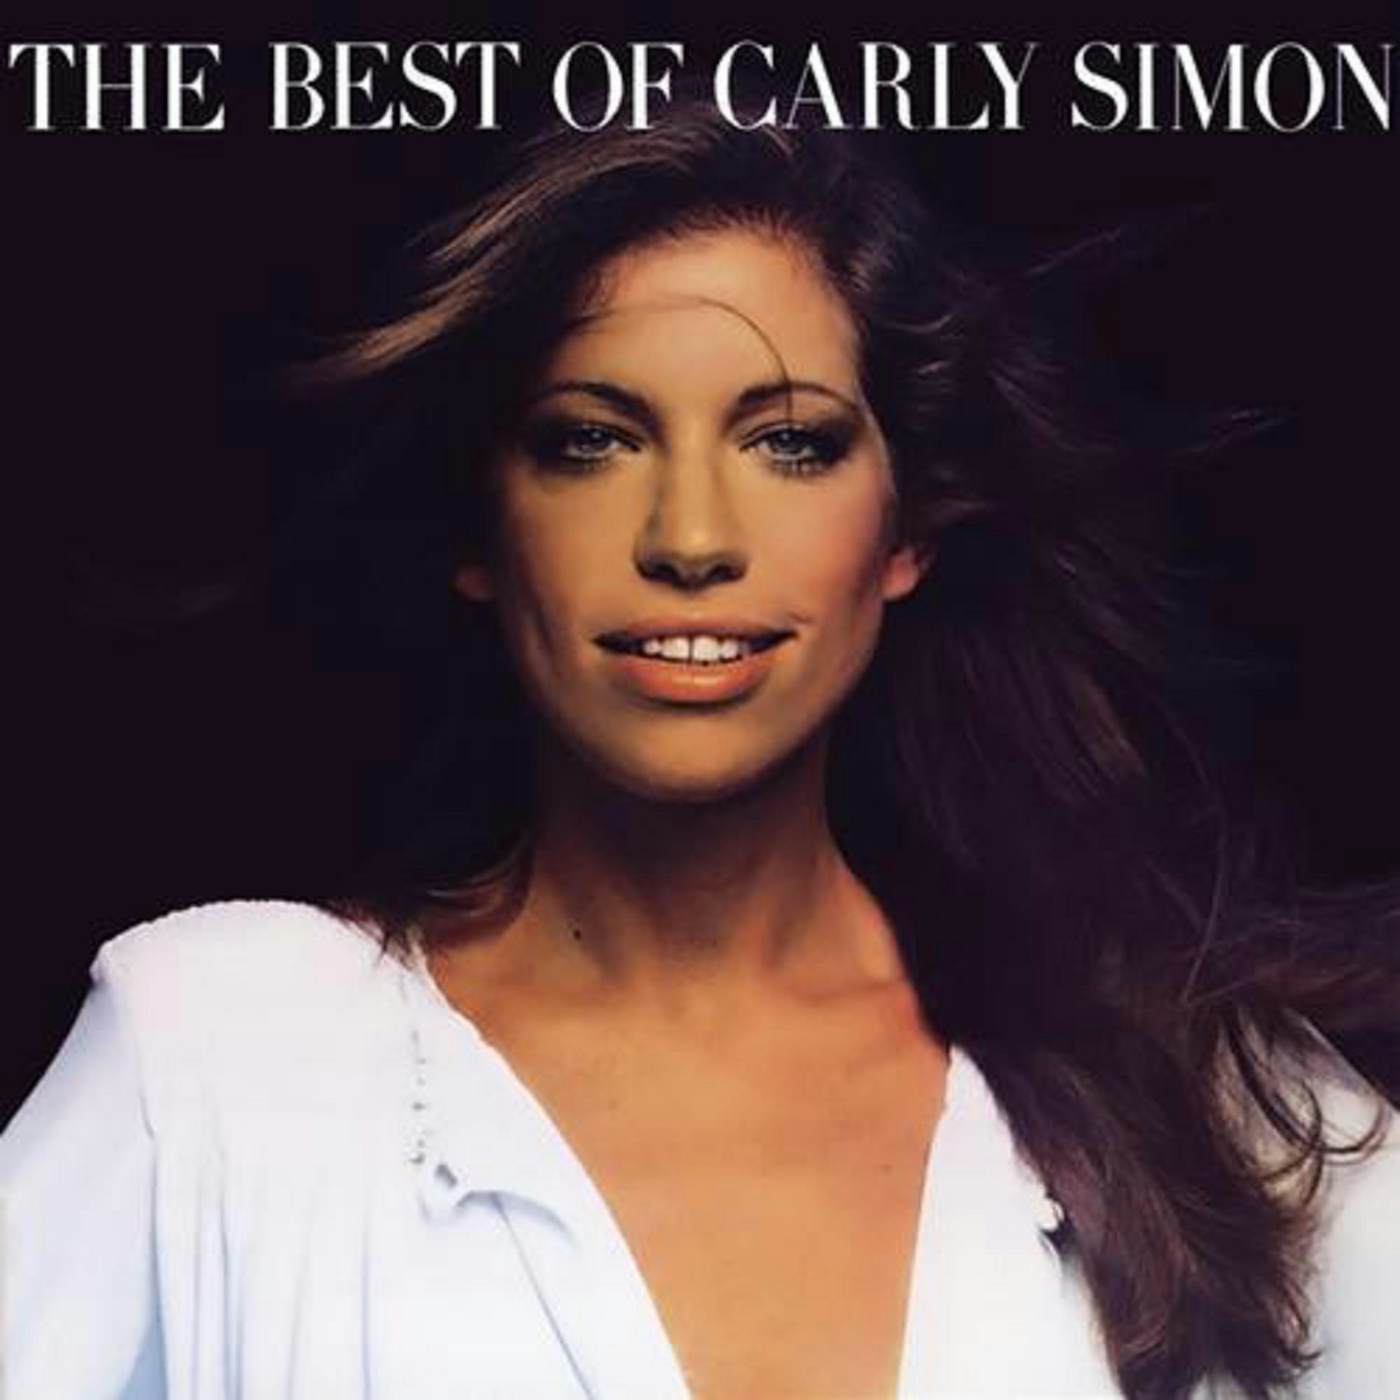 BEST OF CARLY SIMON (180G/TRANSLUCENT RED VINYL/LIMITED ANNIVERSARY EDITION/GATEFOLD COVER) Vinyl Record